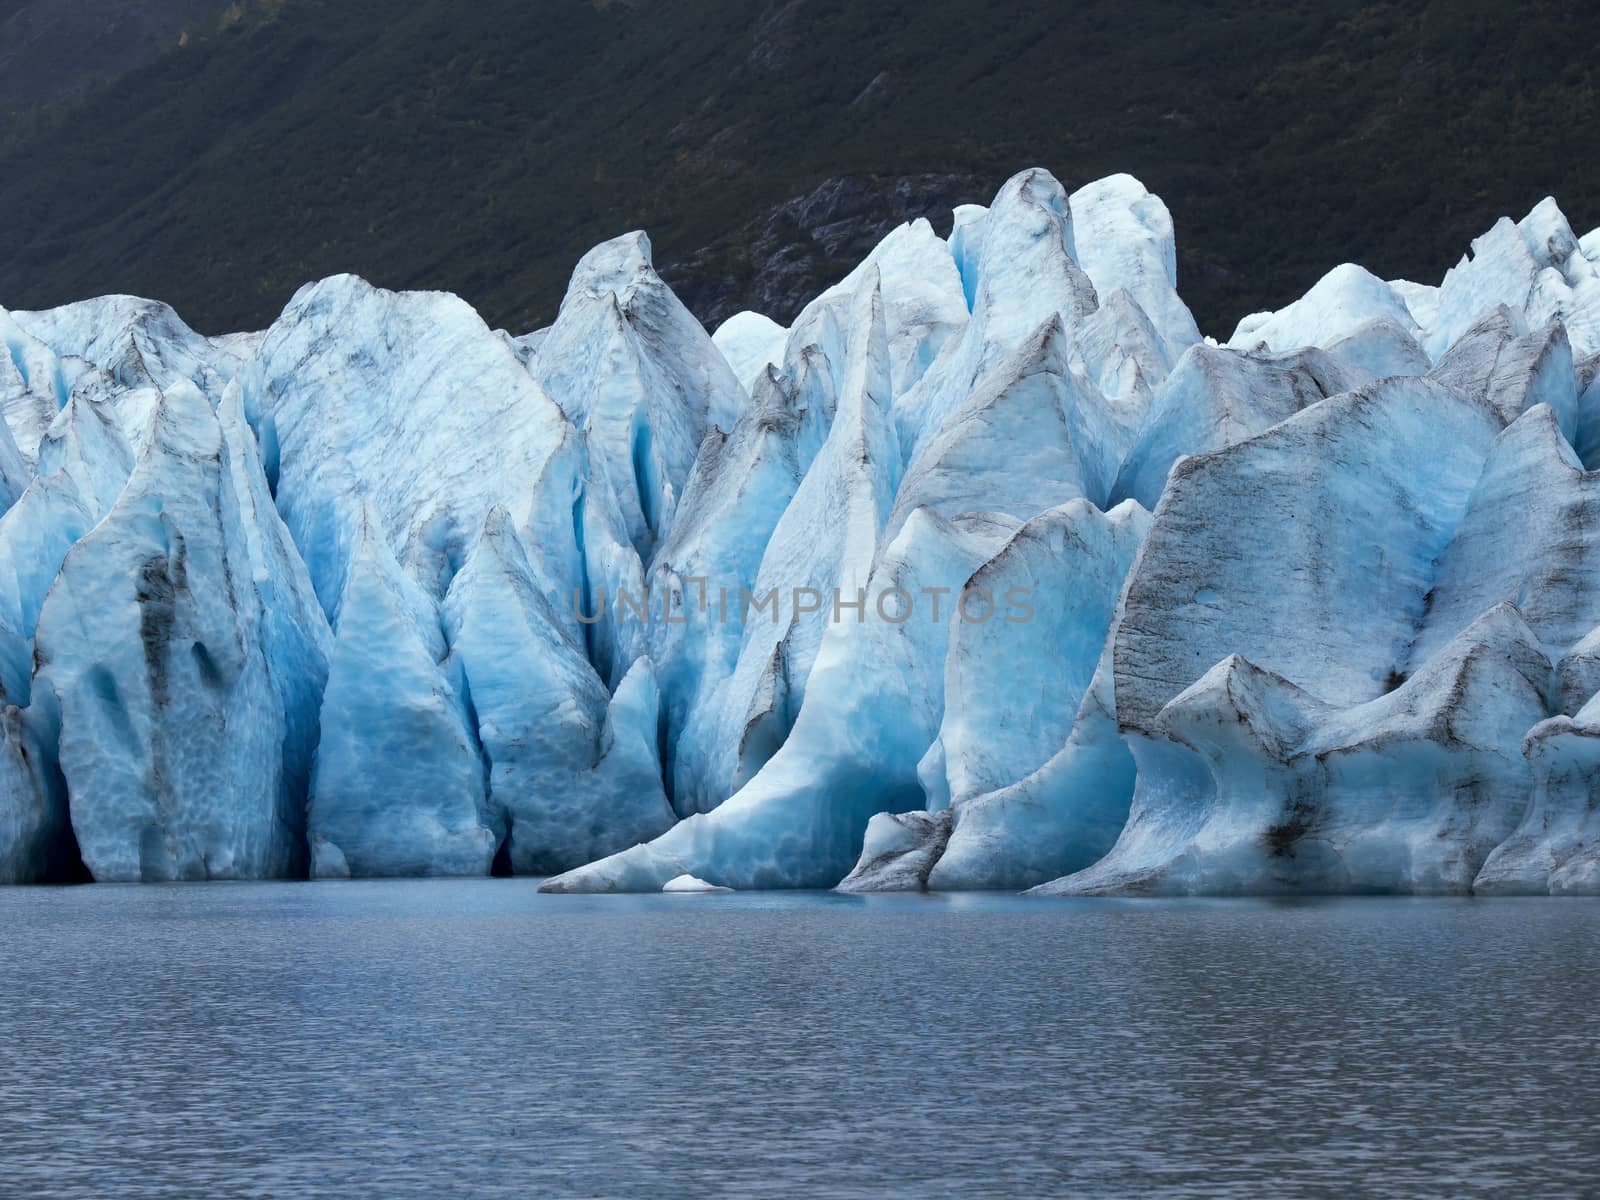 Close Up of Glacier in Water - Alaska Interior by leieng